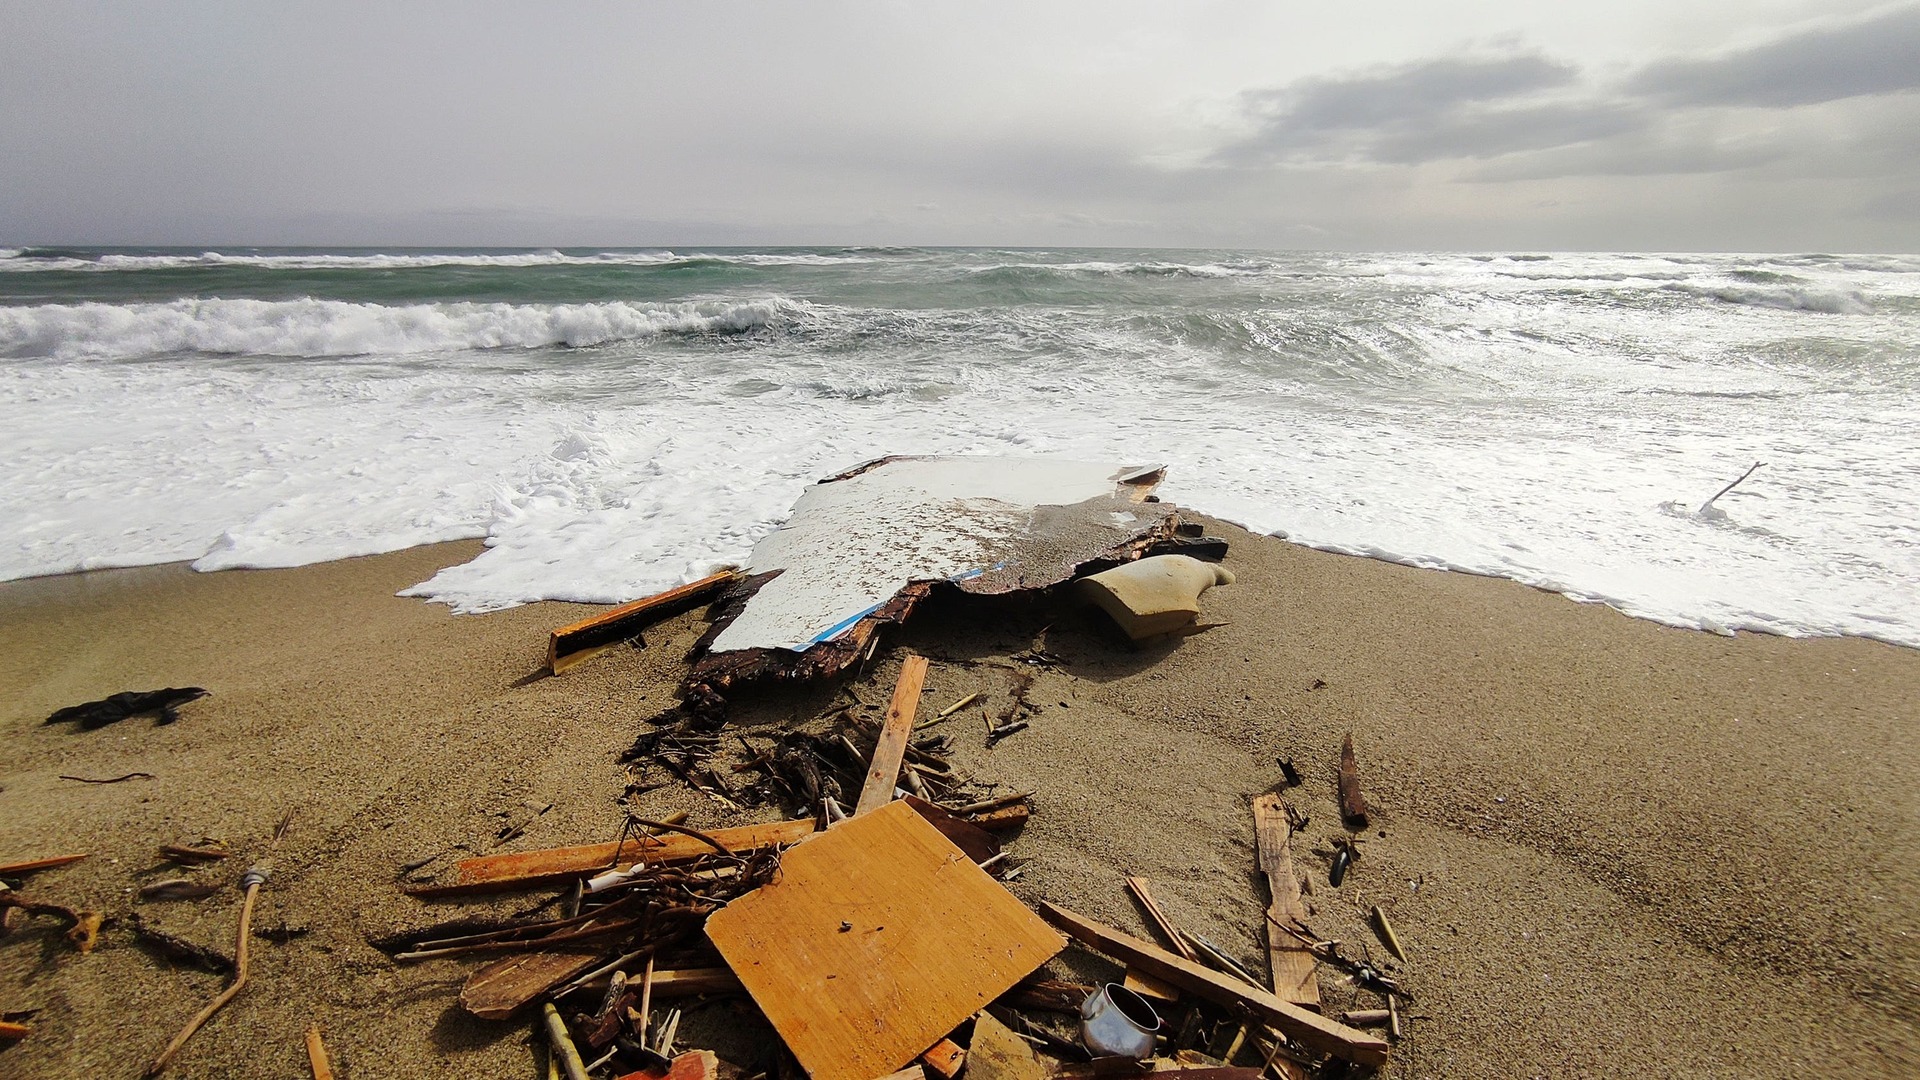 The wreckage from a capsized boat washes ashore at a beach near Cutro.